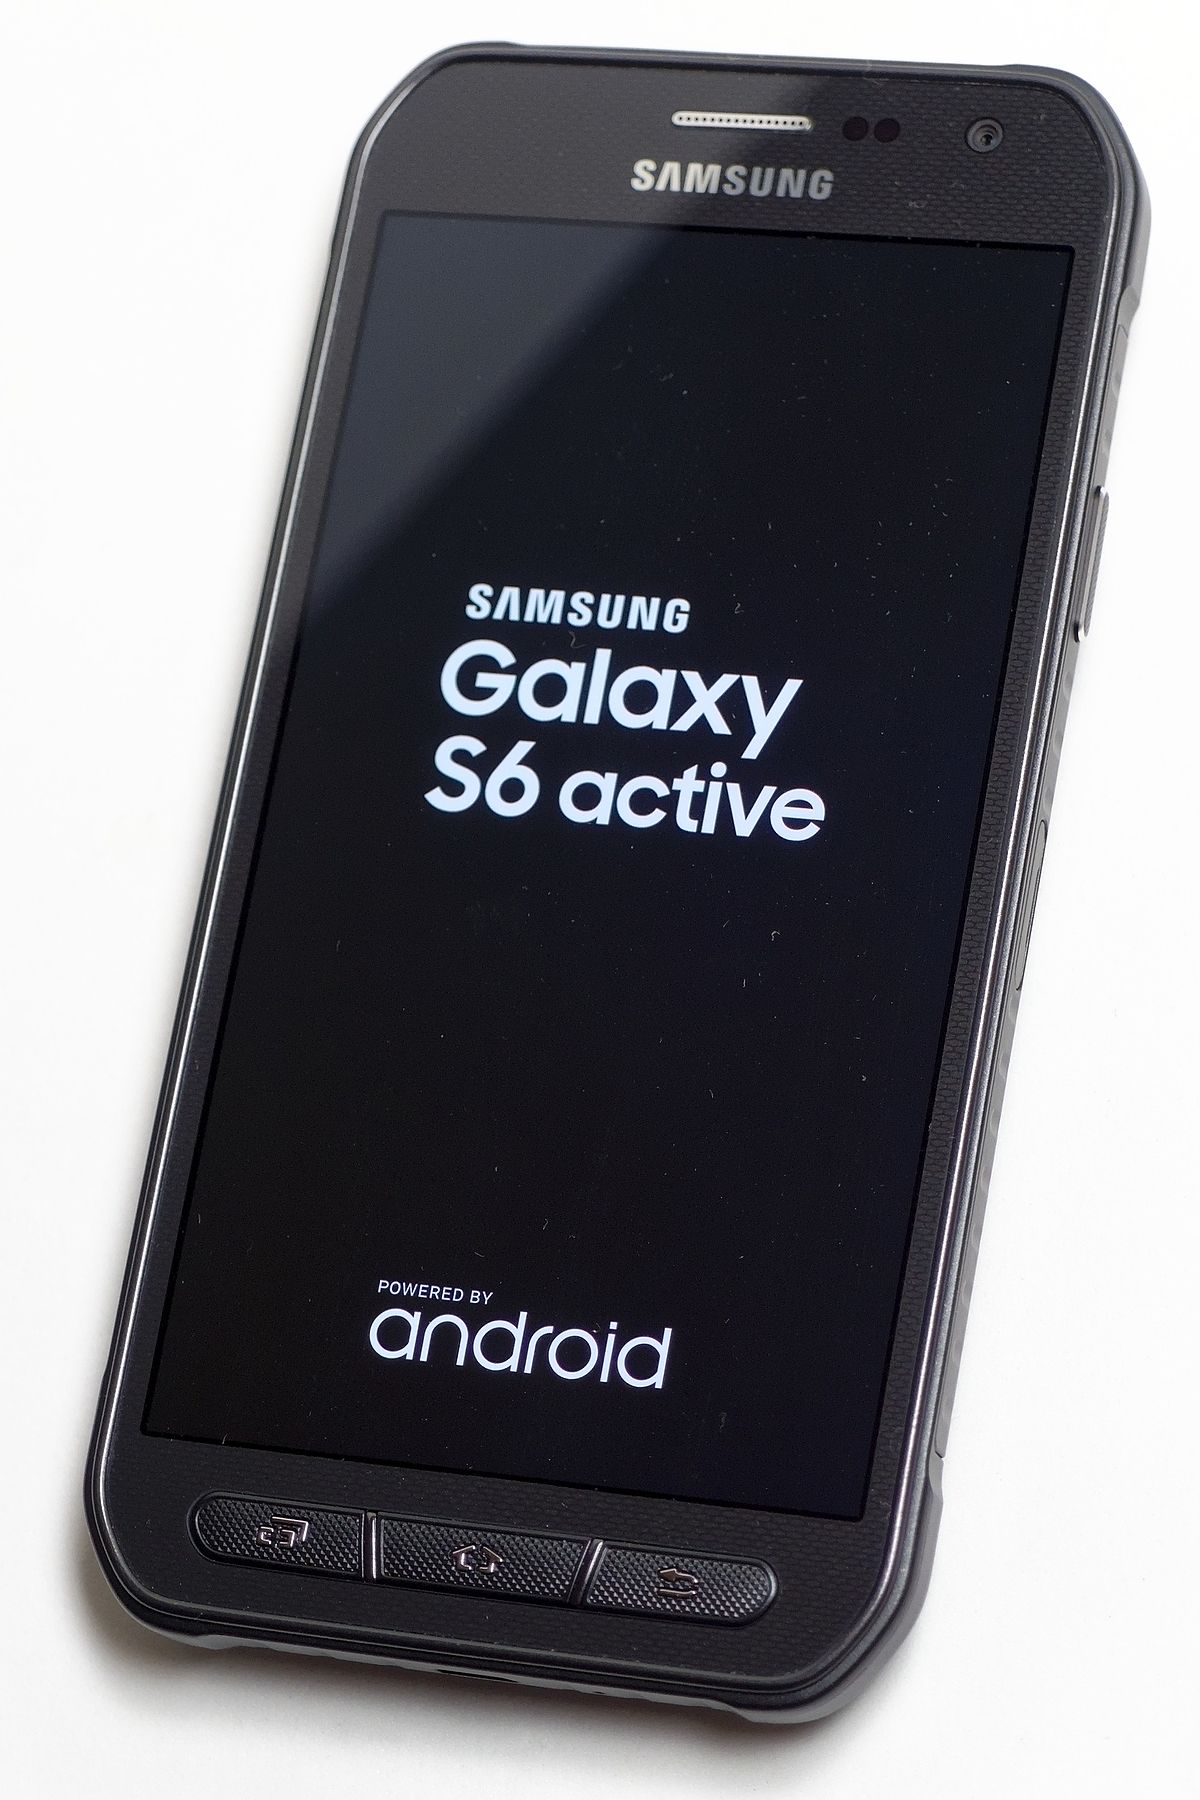 Fixed - Vibration not working on Samsung Galaxy S6 active